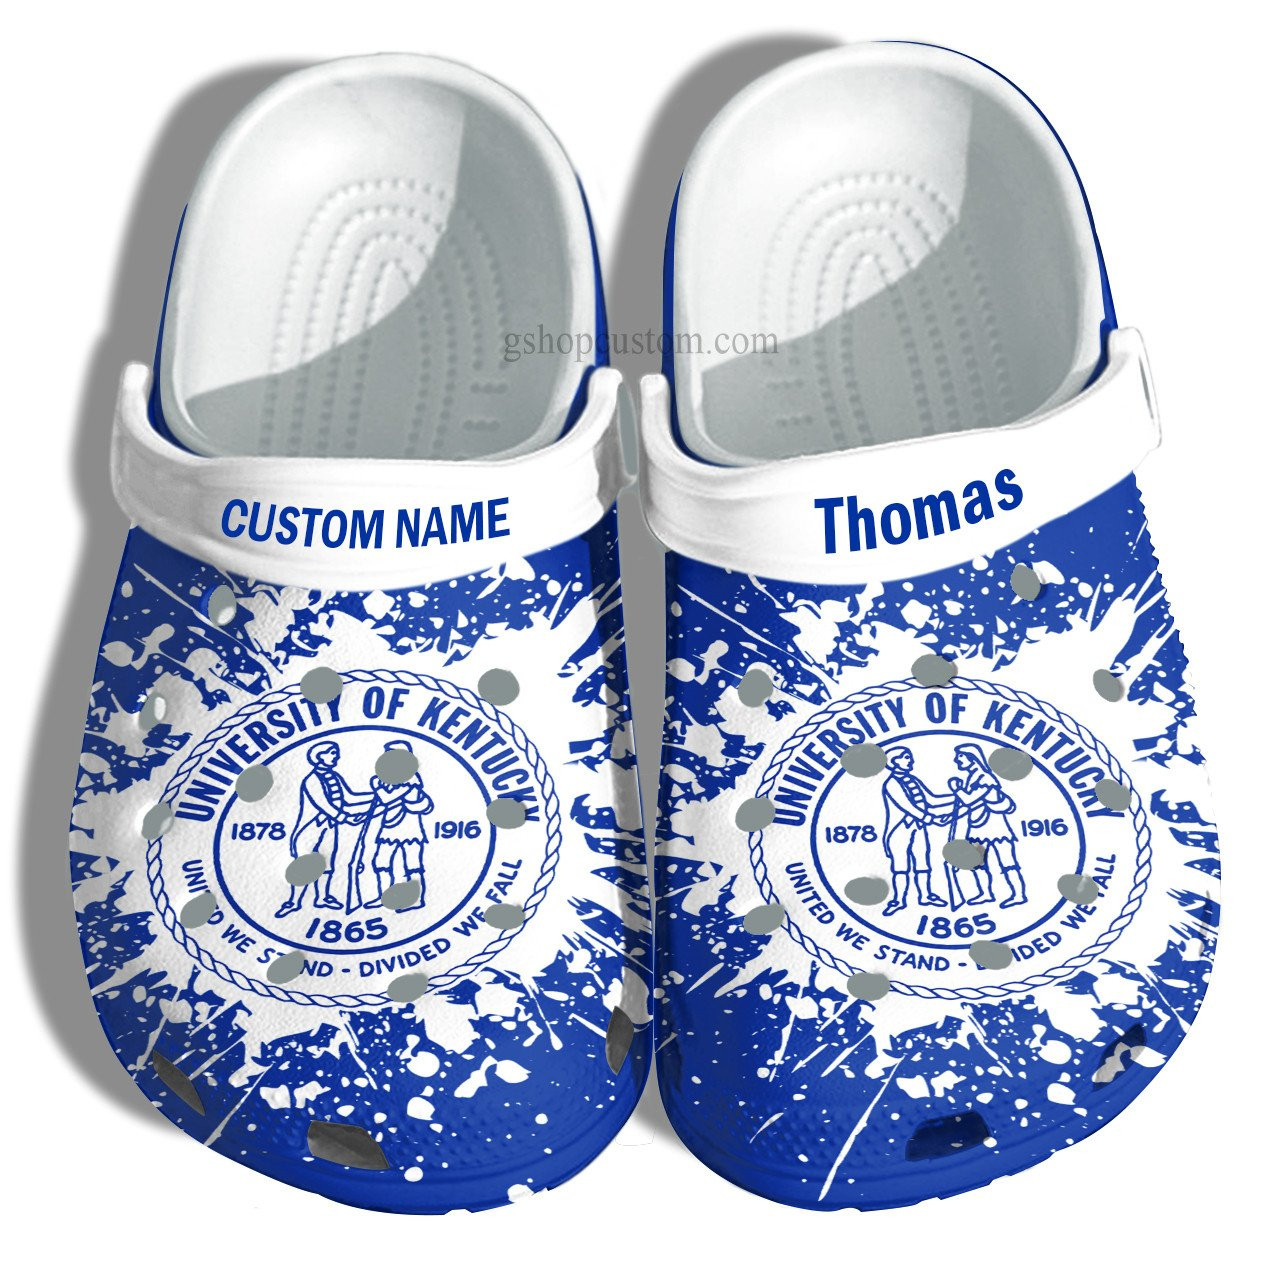 University Of Kentucky Graduation Gifts Croc Shoes Customize- Admission Gift Crocs Shoes